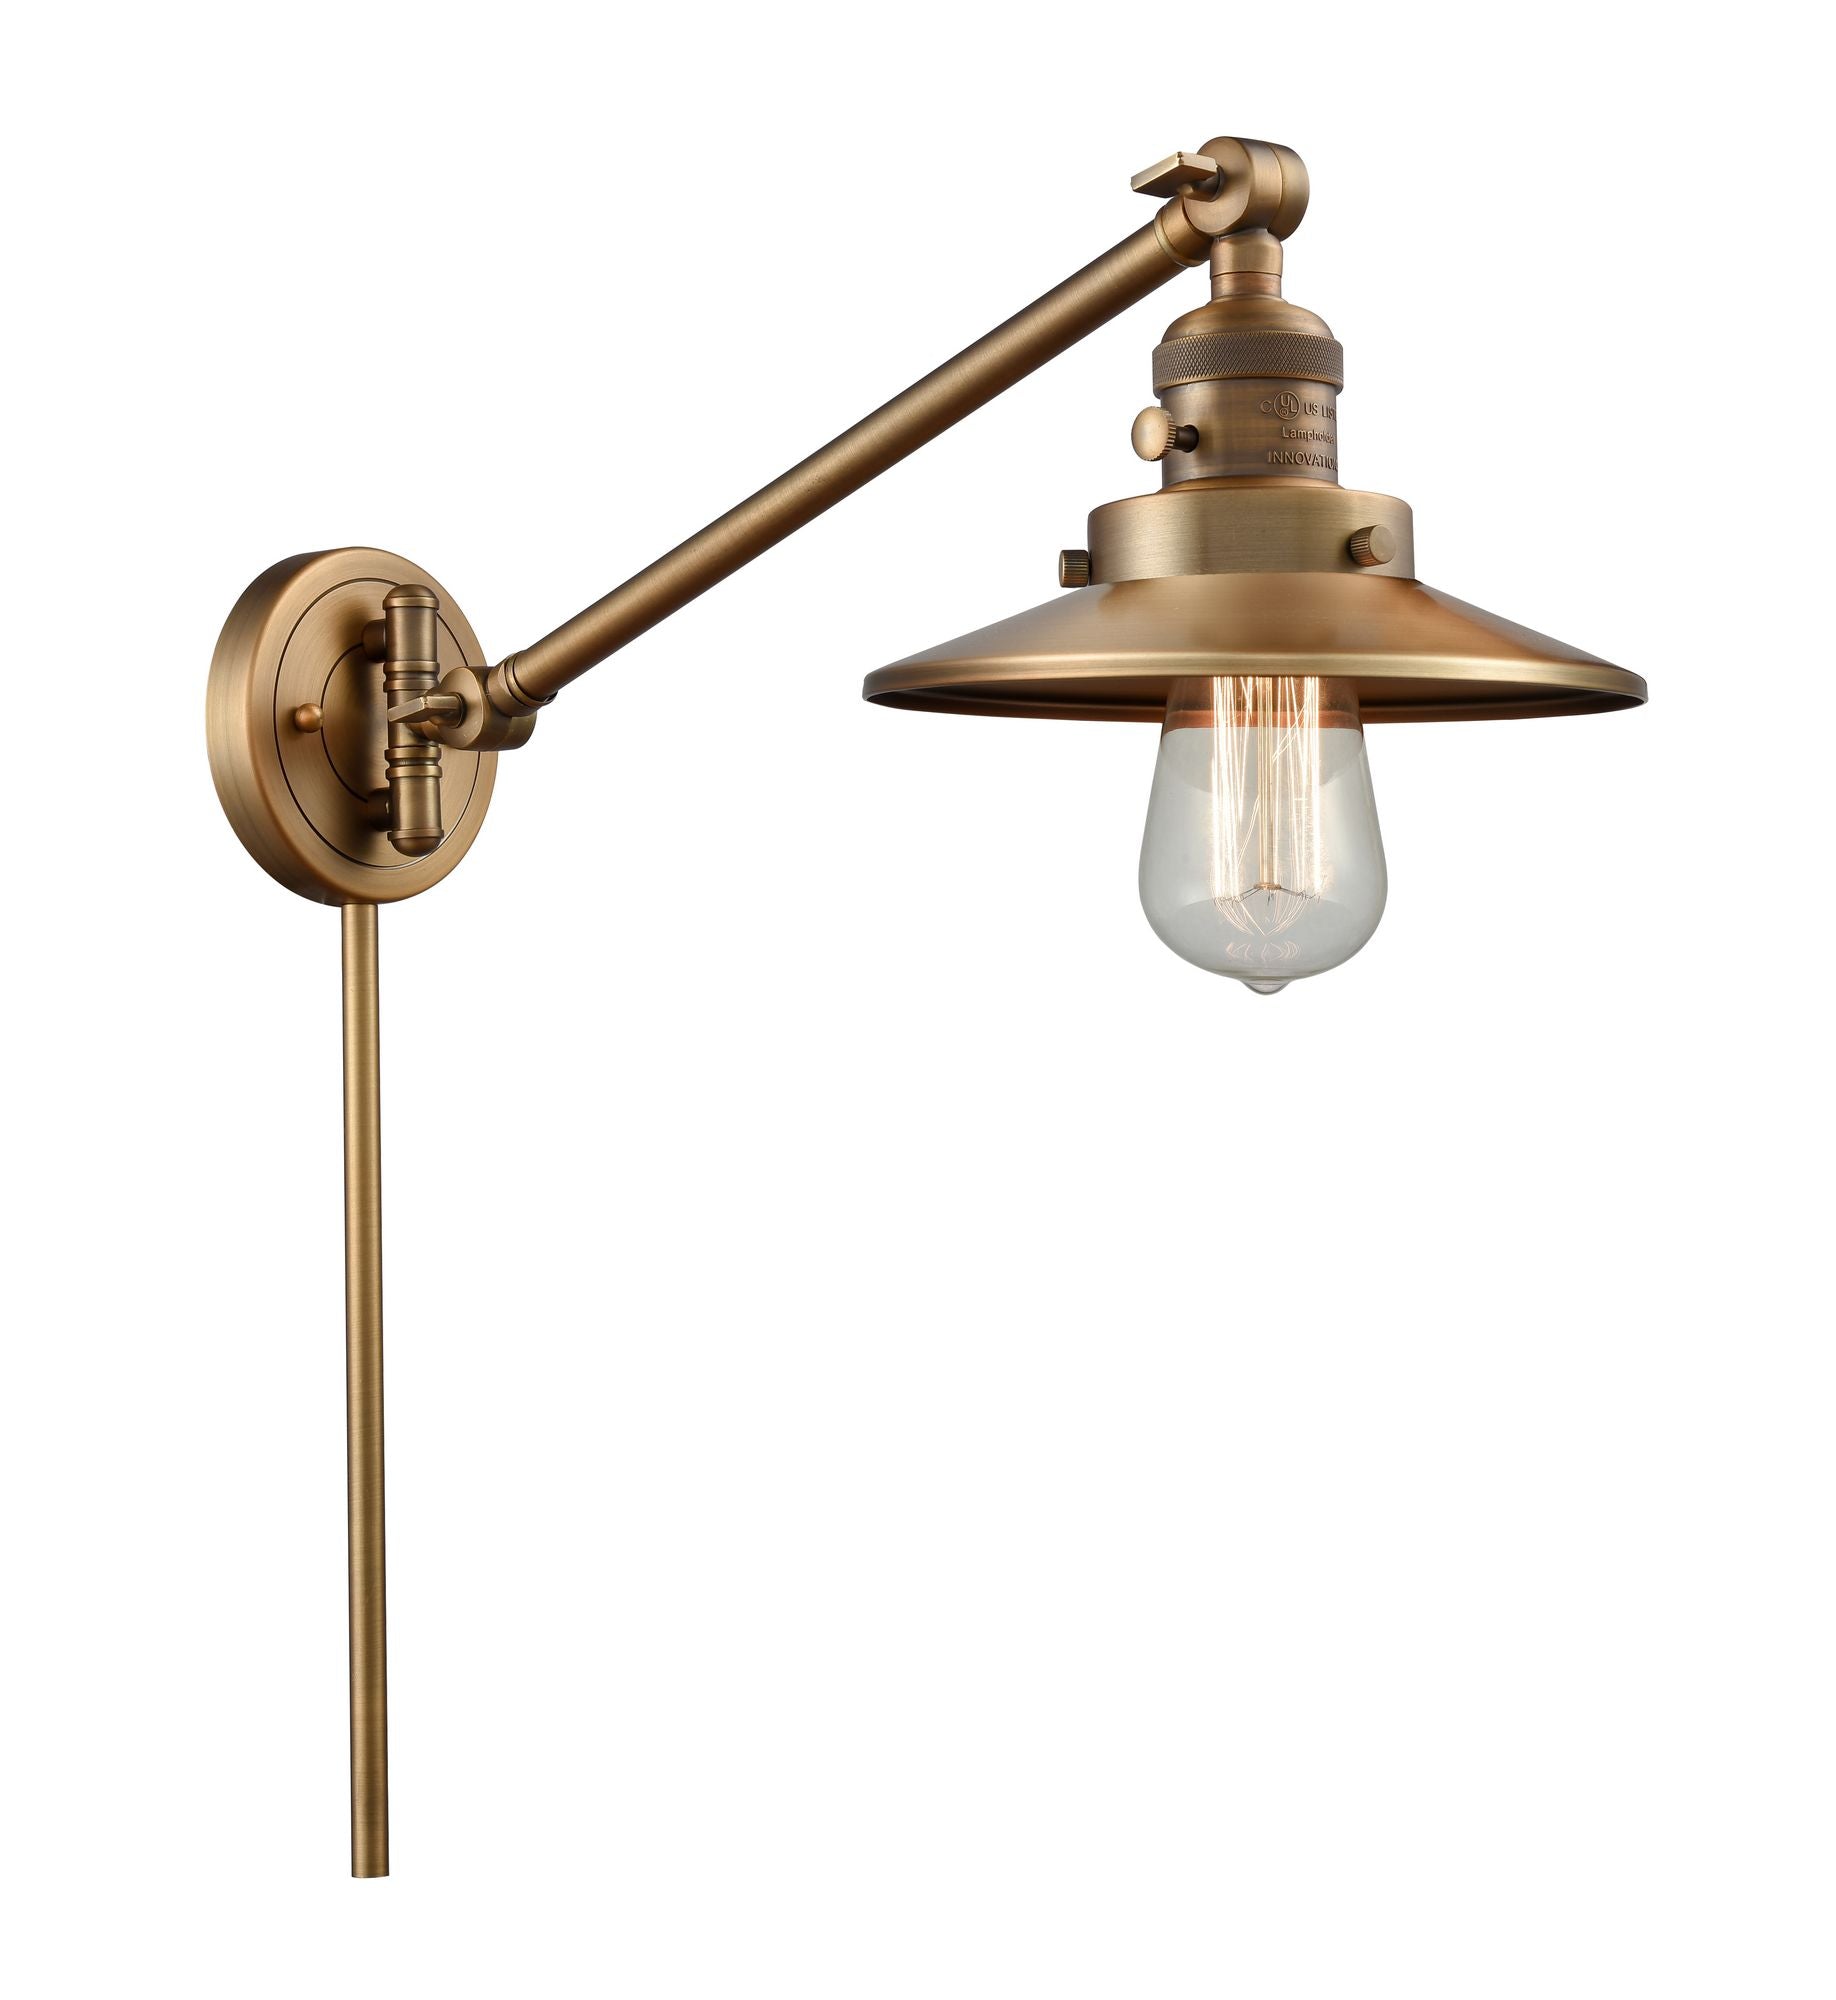 1-Light 8" Brushed Brass Swing Arm - Brushed Brass Railroad Shade - Incandesent Or LED Bulbs